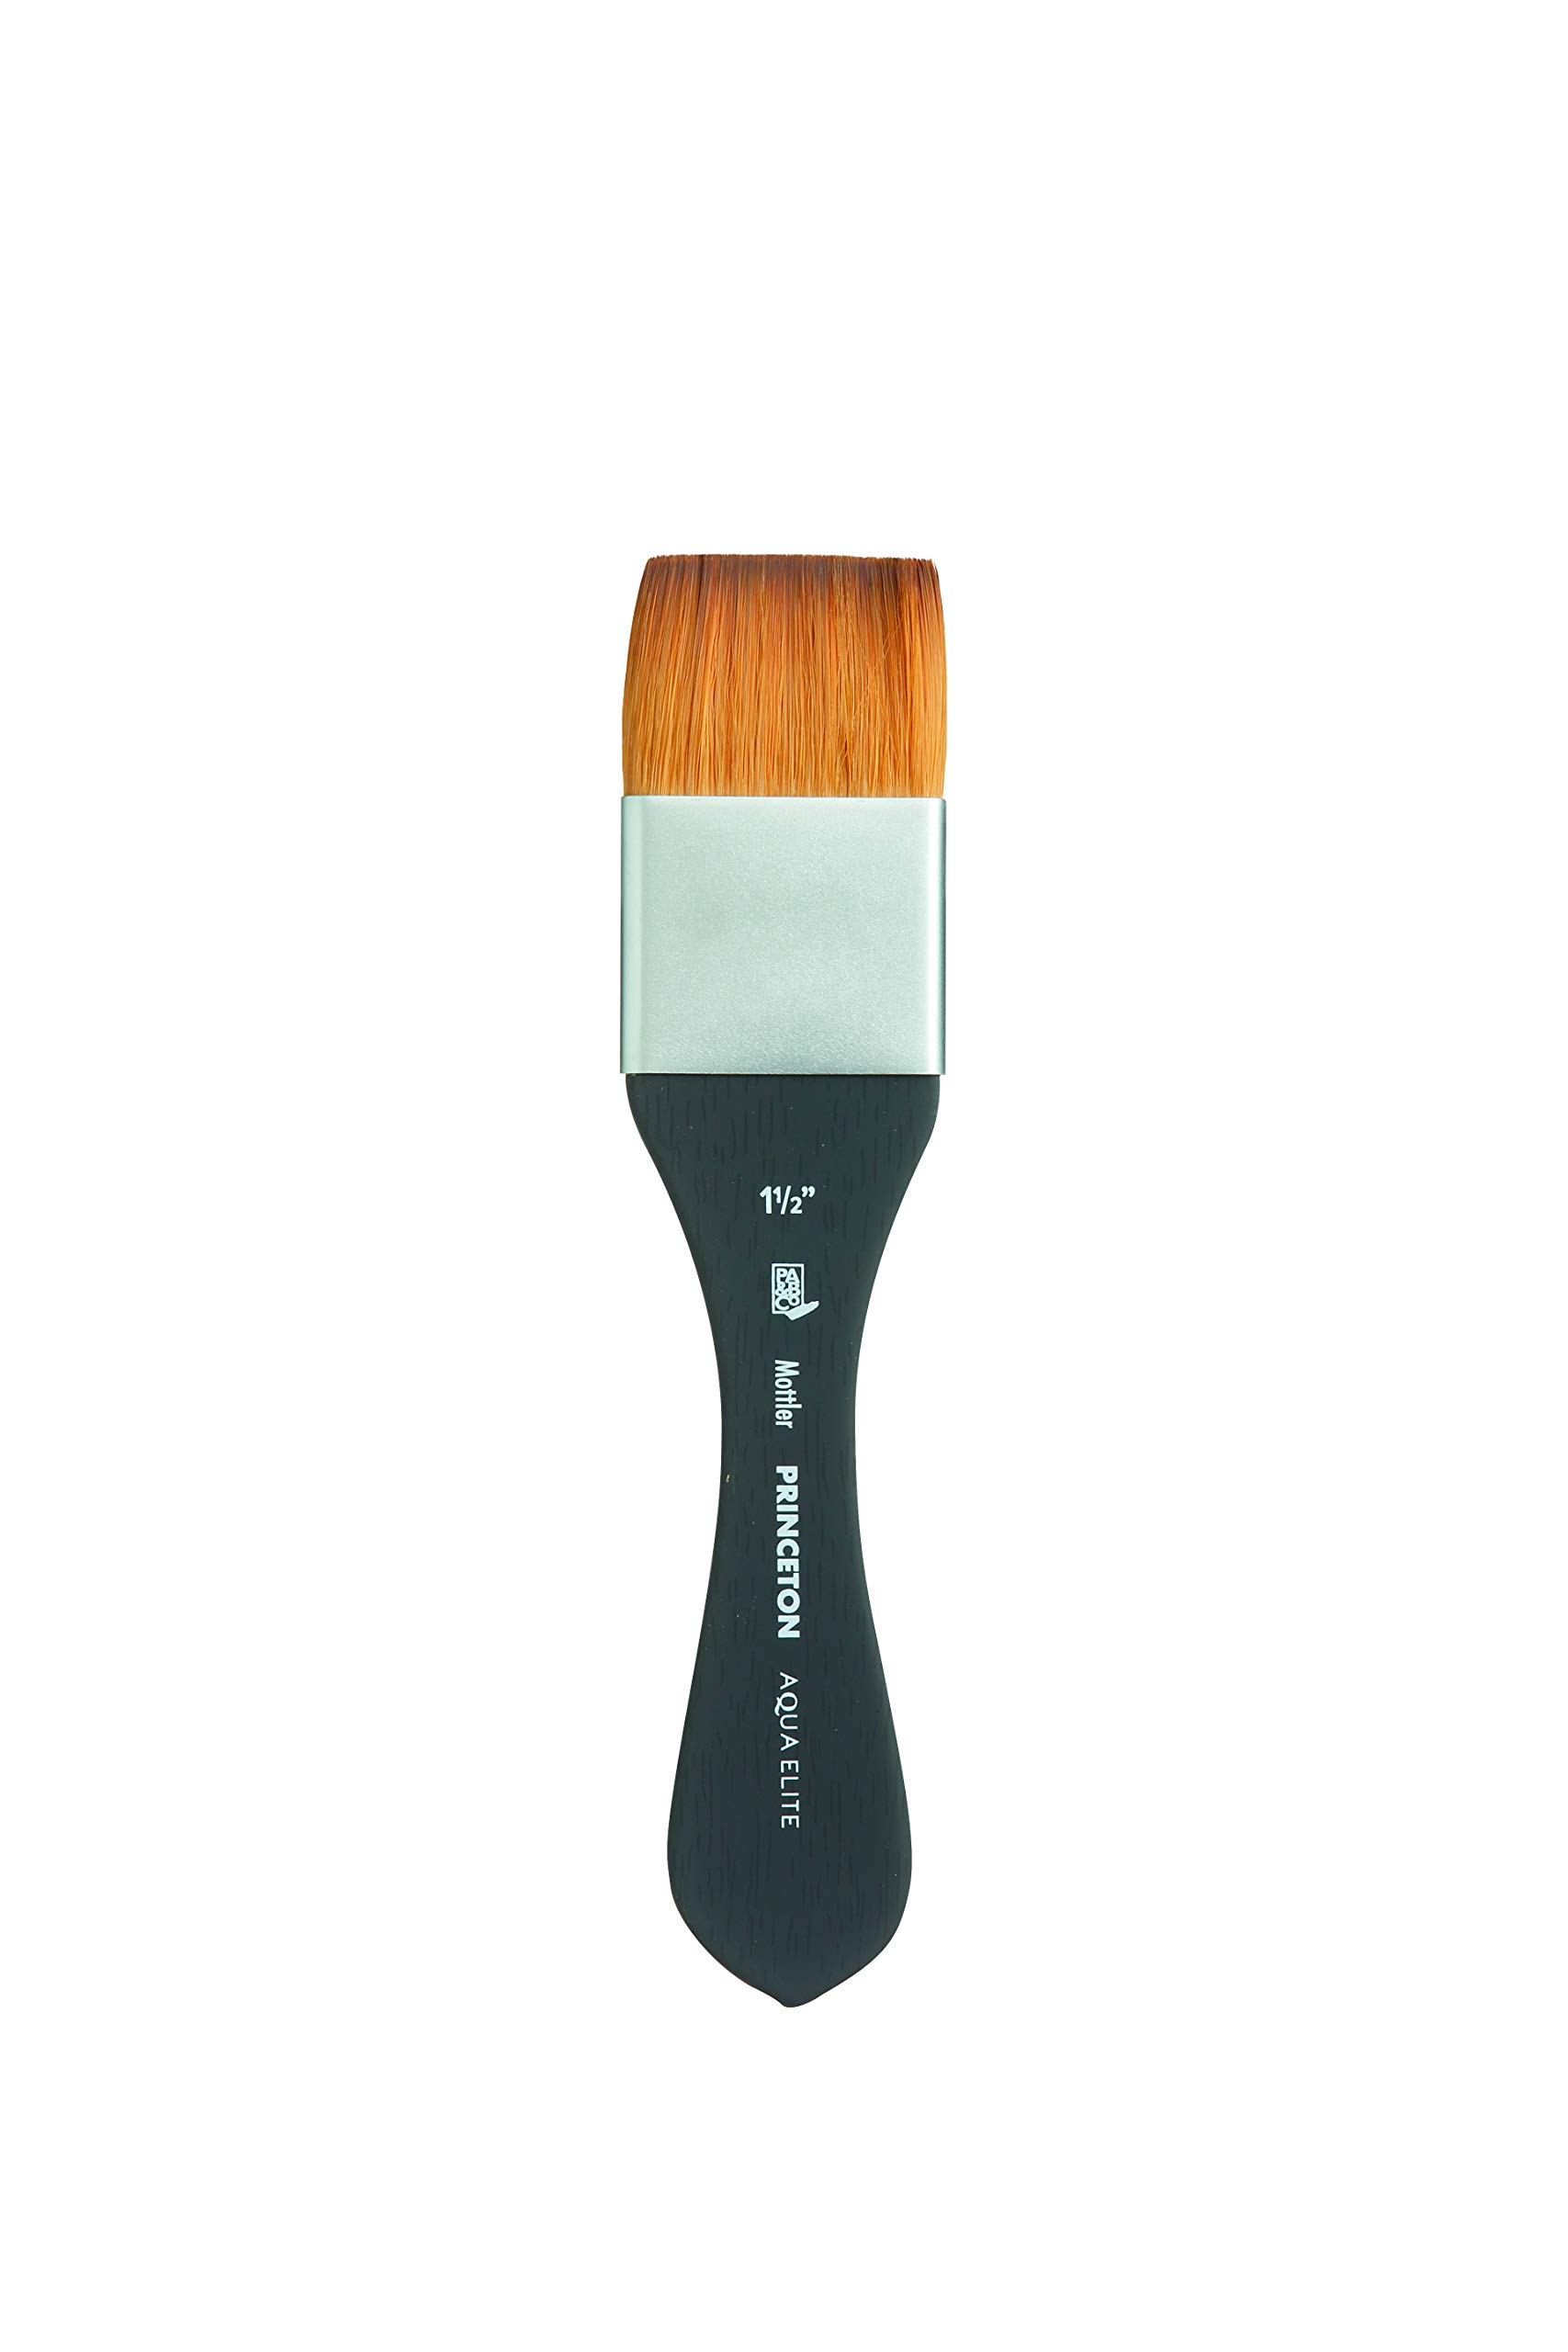 Princeton Aqua Elite, Series 4850, Synthetic Kolinsky Watercolor Paint  Brush.Including Long Rounds,Oval Washes,Mottlers and More